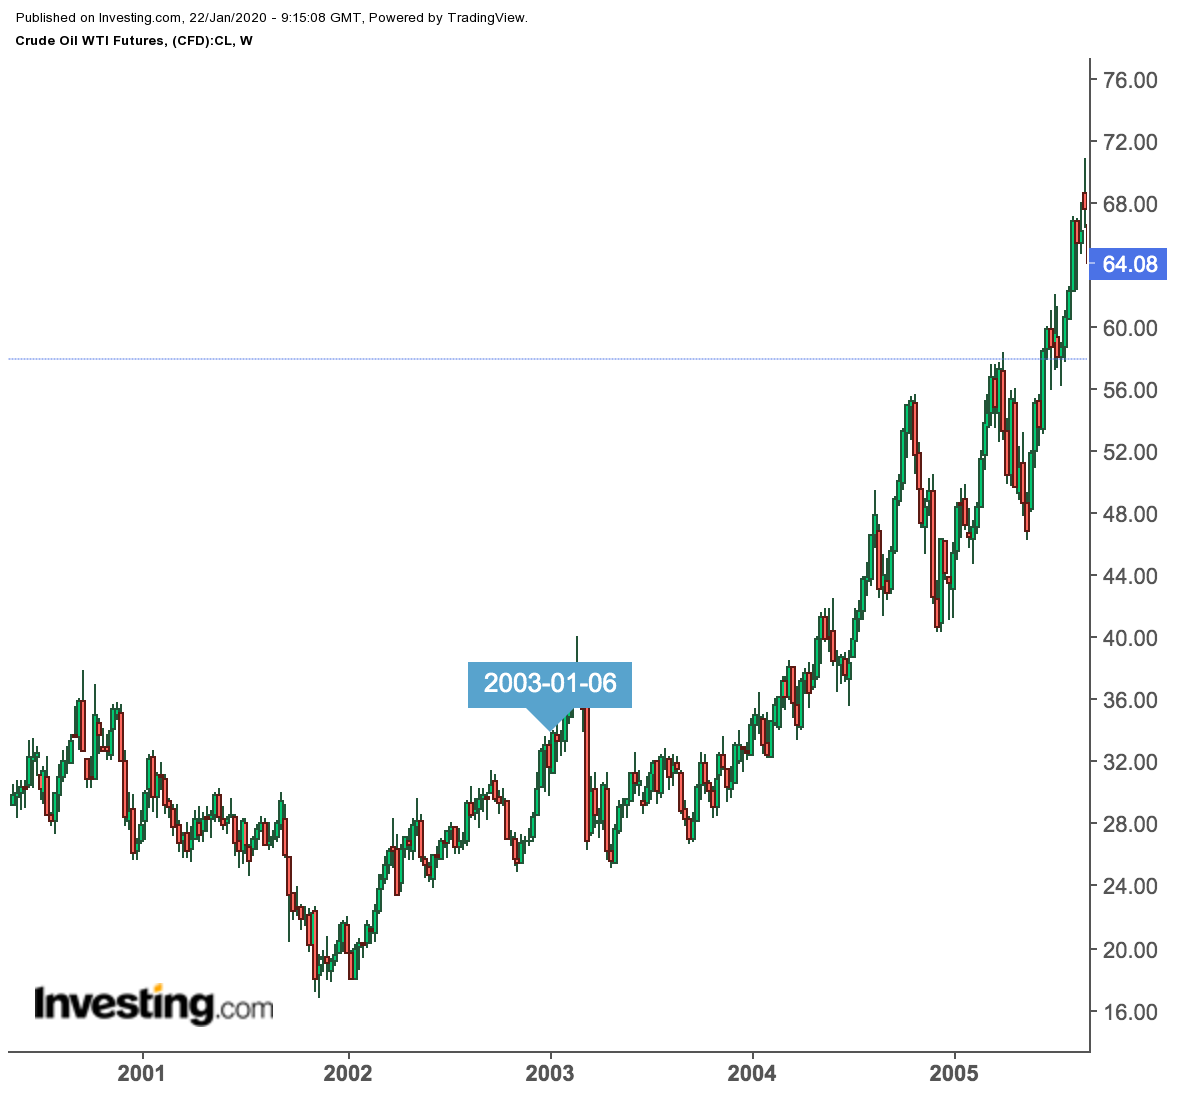 WTI Weekly Prices, 2001-2005